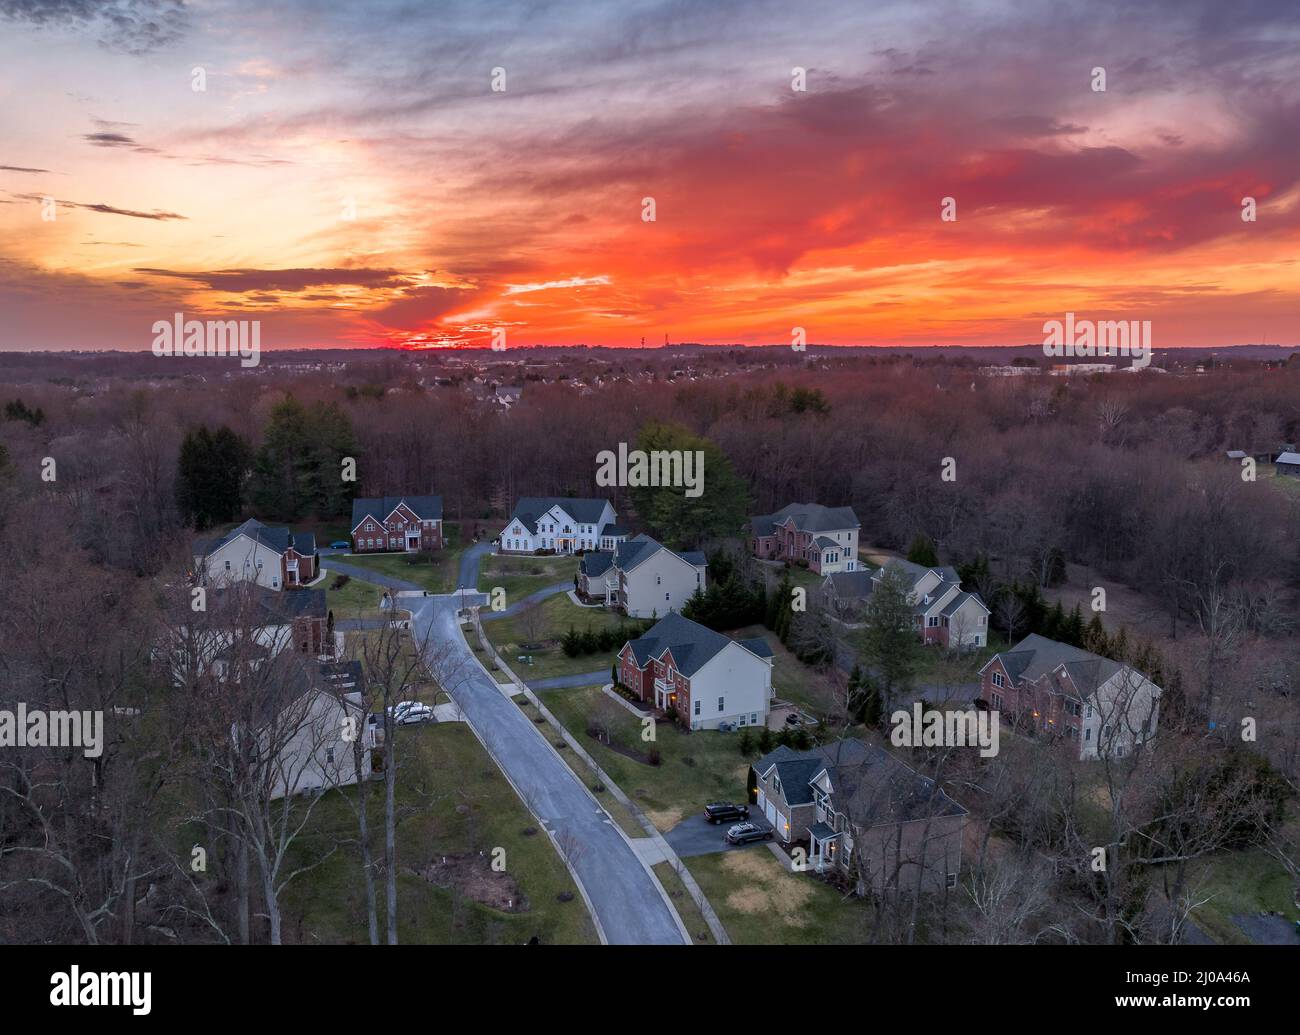 Curving road leading to a dead end neighborhood with colorful orange evening sun is setting over upper class East Coast American neighborhood cul-de-s Stock Photo